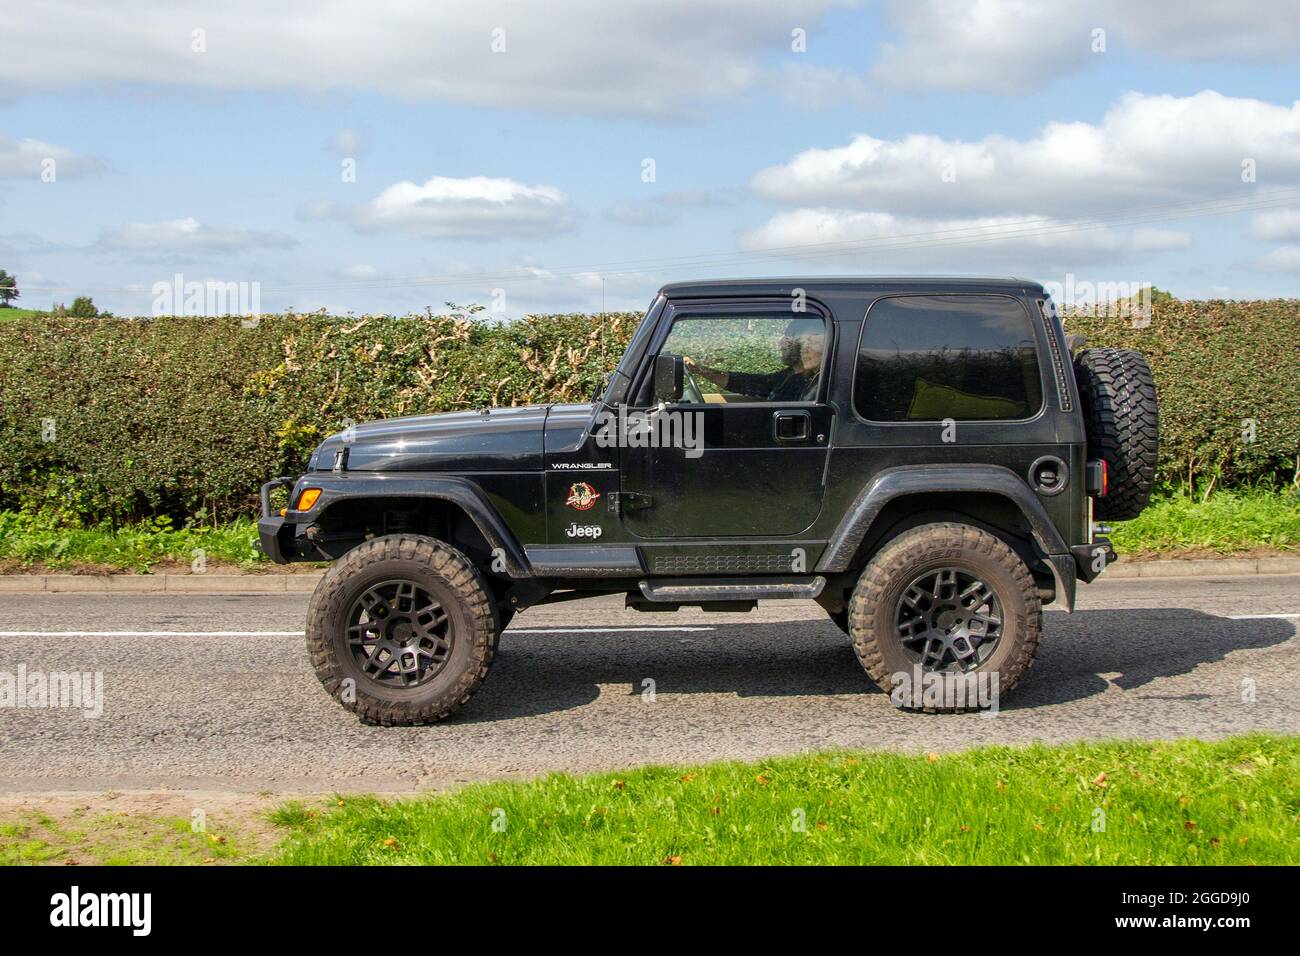 2002 black Jeep Wrangler, 2dr 4x4 off-road vehicle en-route to Capesthorne  Hall classic August car show, Cheshire, UK Stock Photo - Alamy